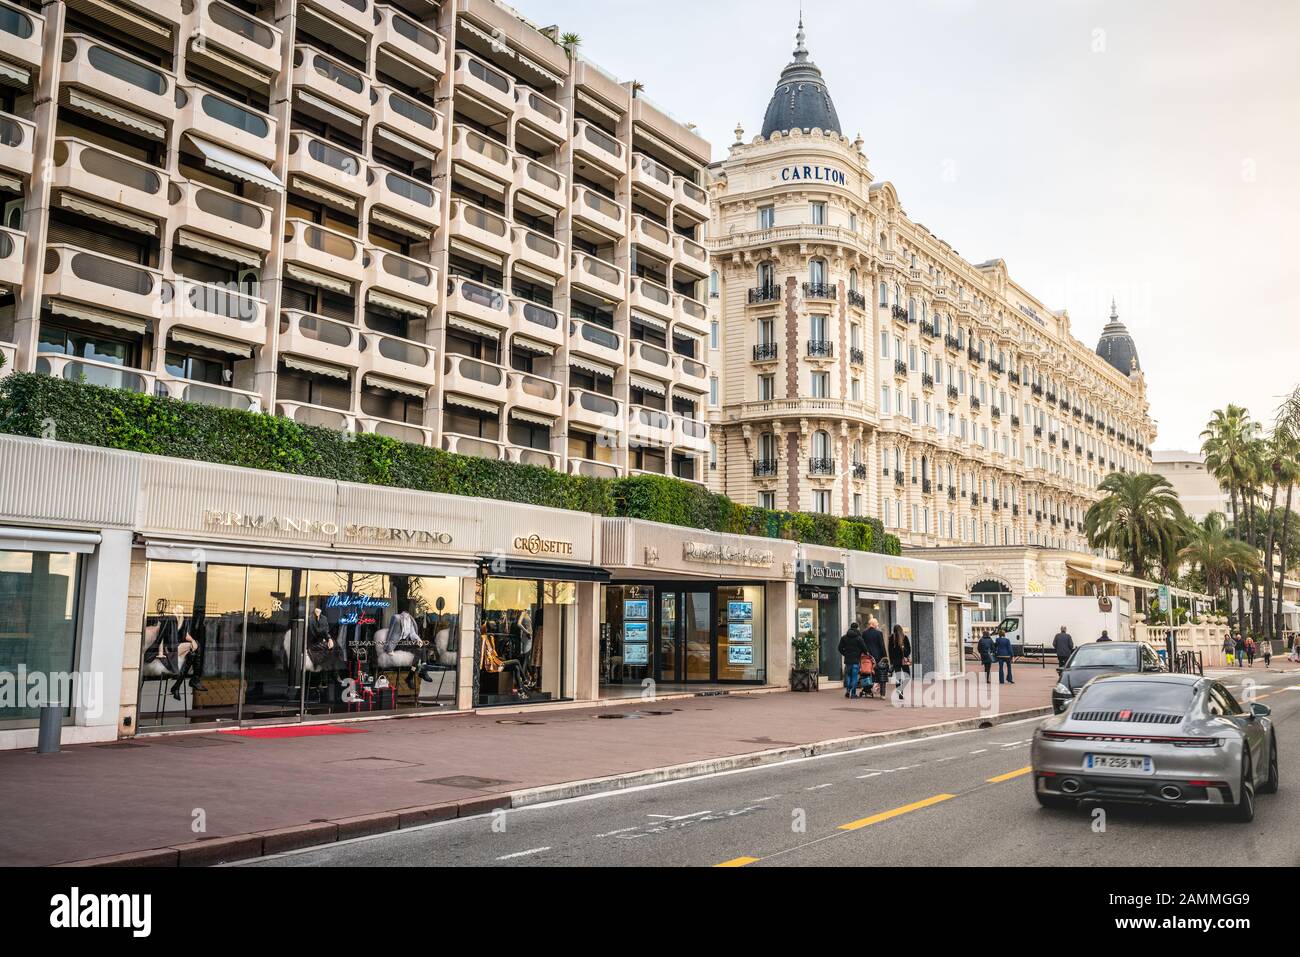 Cannes France, 29 December 2019 : Boulevard de la Croisette street view with luxury shops and Intercontinental Carlton hotel in Cannes France Stock Photo